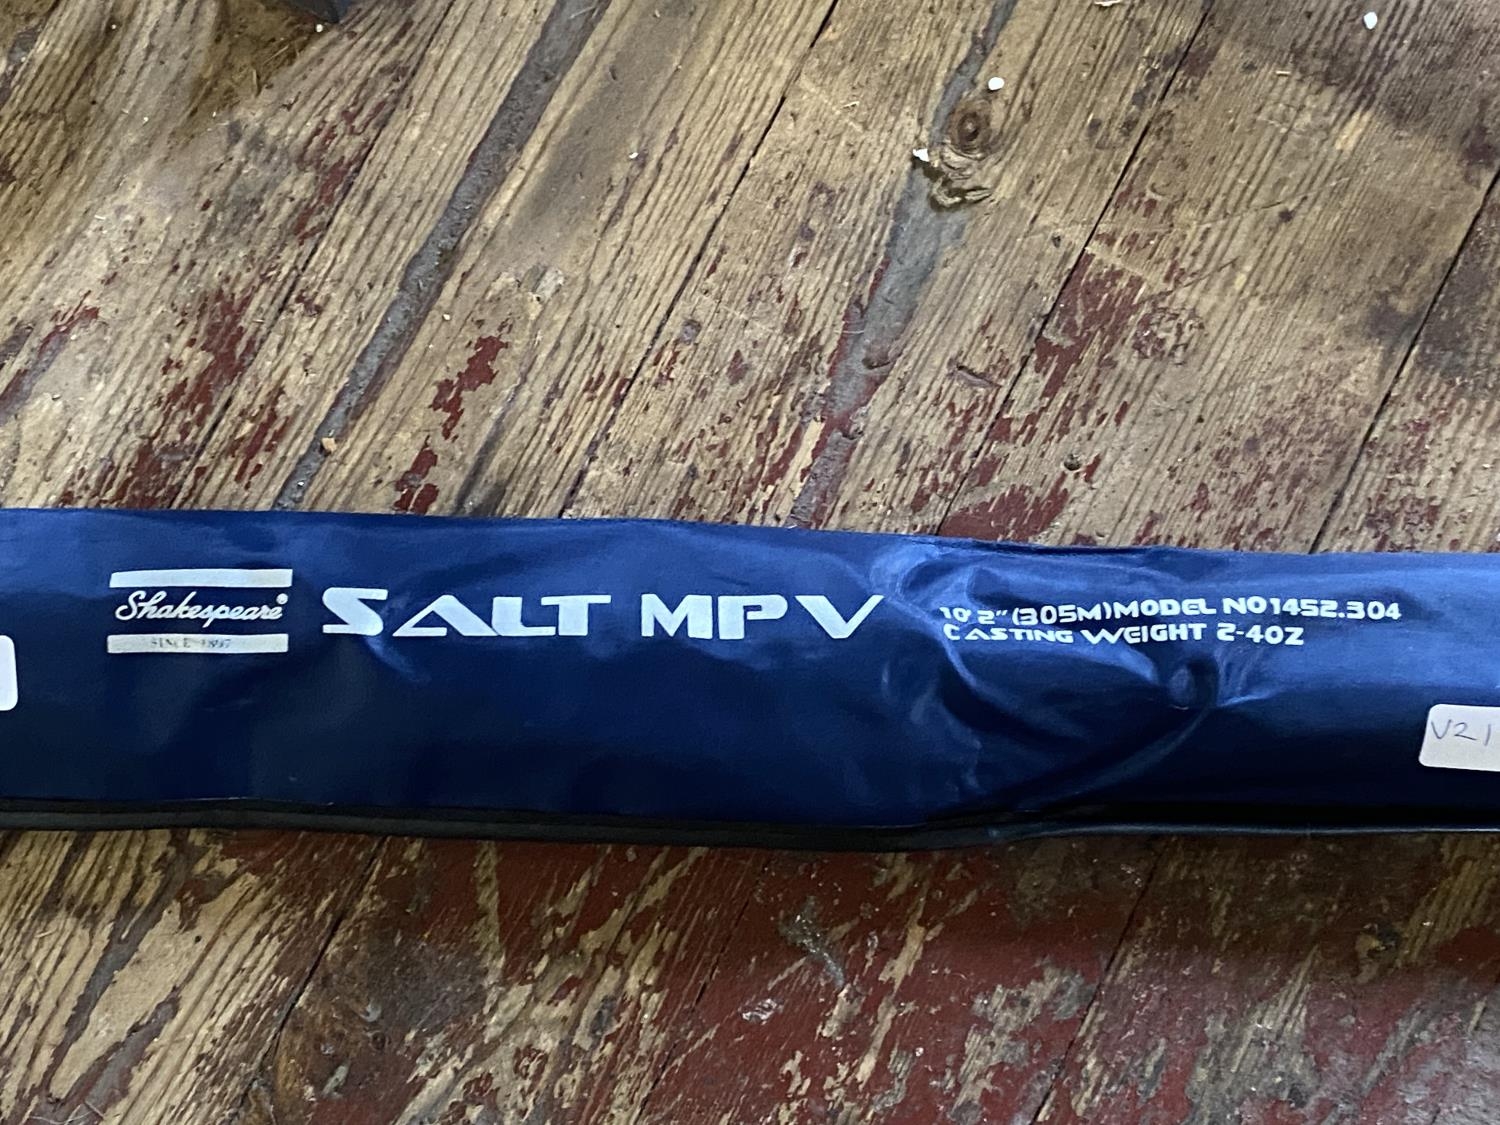 A Shakespeare Sale MVP boat rod, shipping unavailable